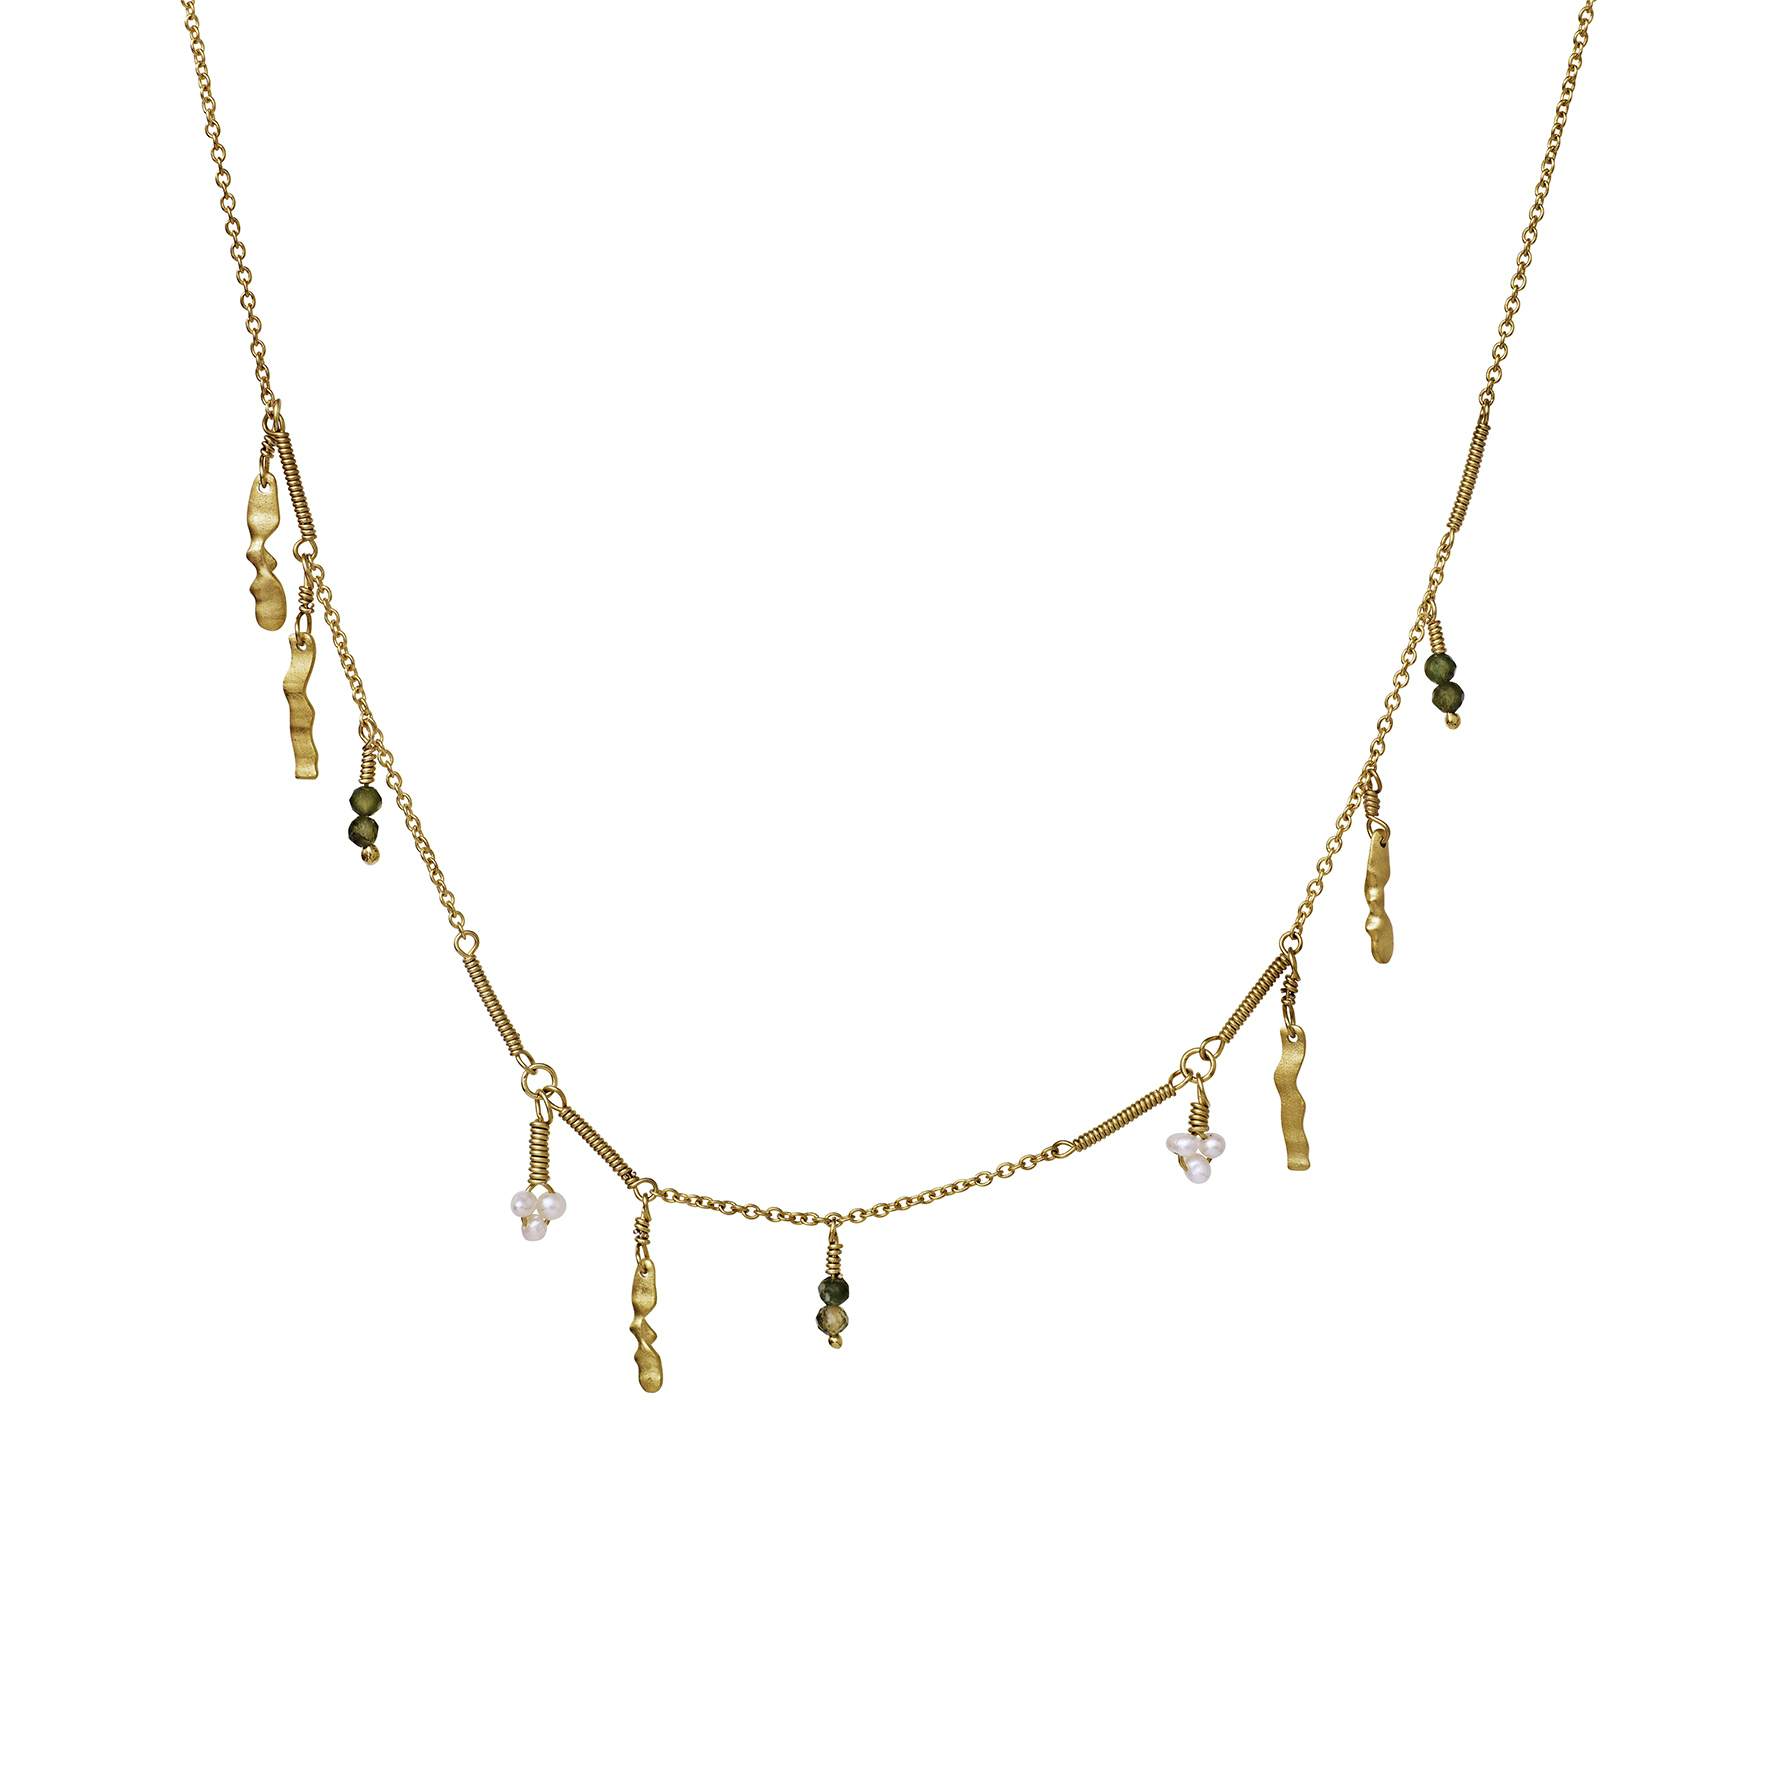 Bergdis Necklace from Maanesten in Goldplated-Silver Sterling 925